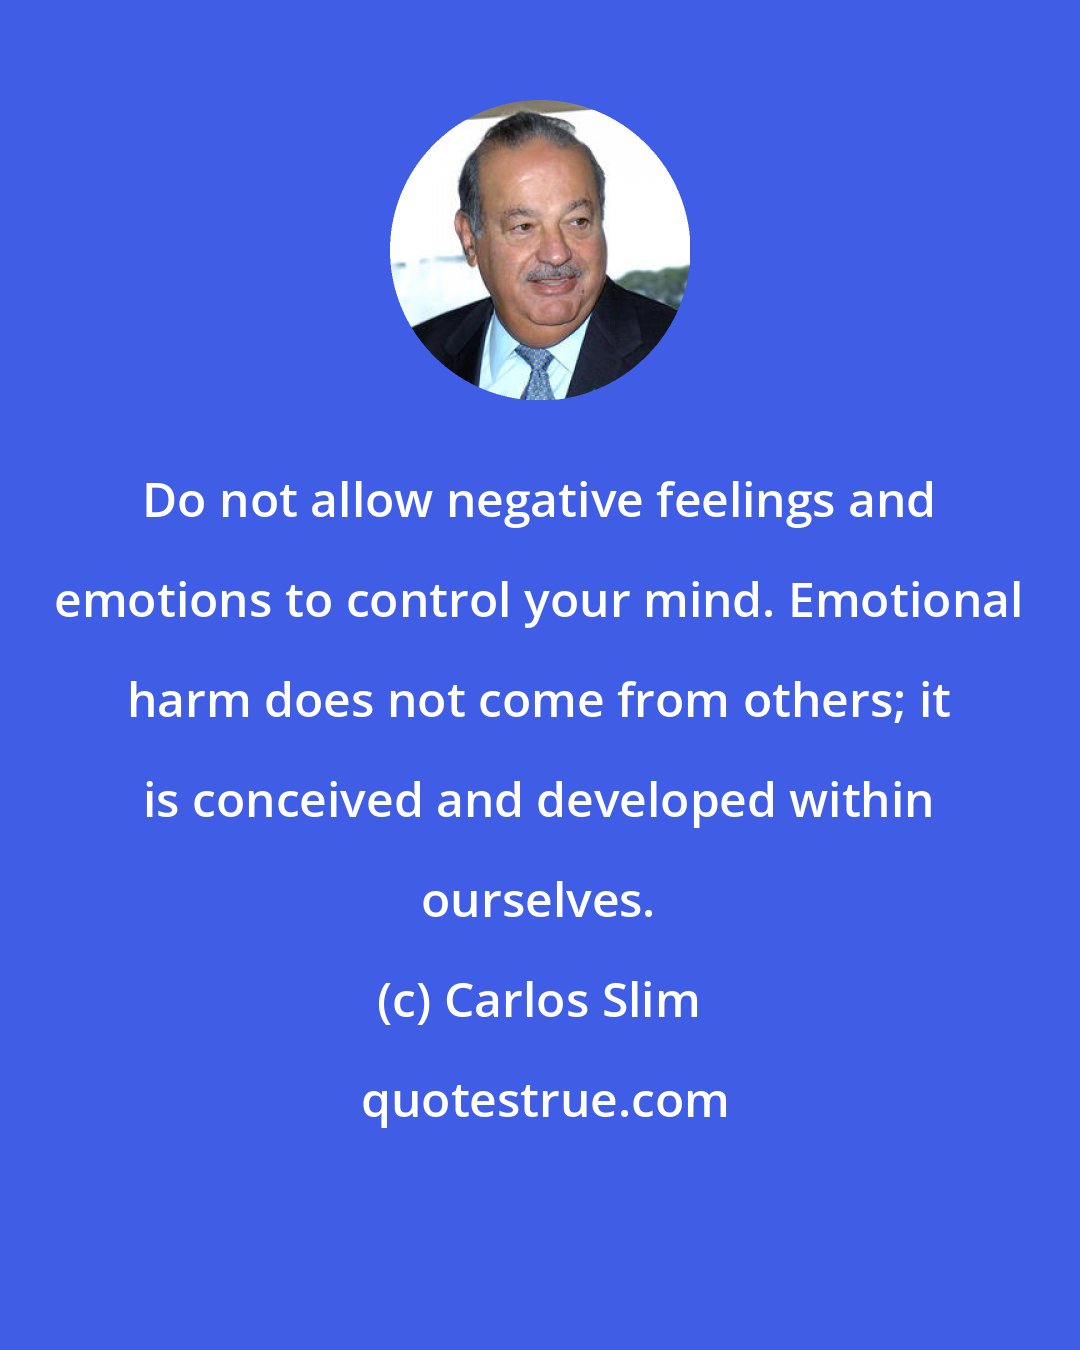 Carlos Slim: Do not allow negative feelings and emotions to control your mind. Emotional harm does not come from others; it is conceived and developed within ourselves.